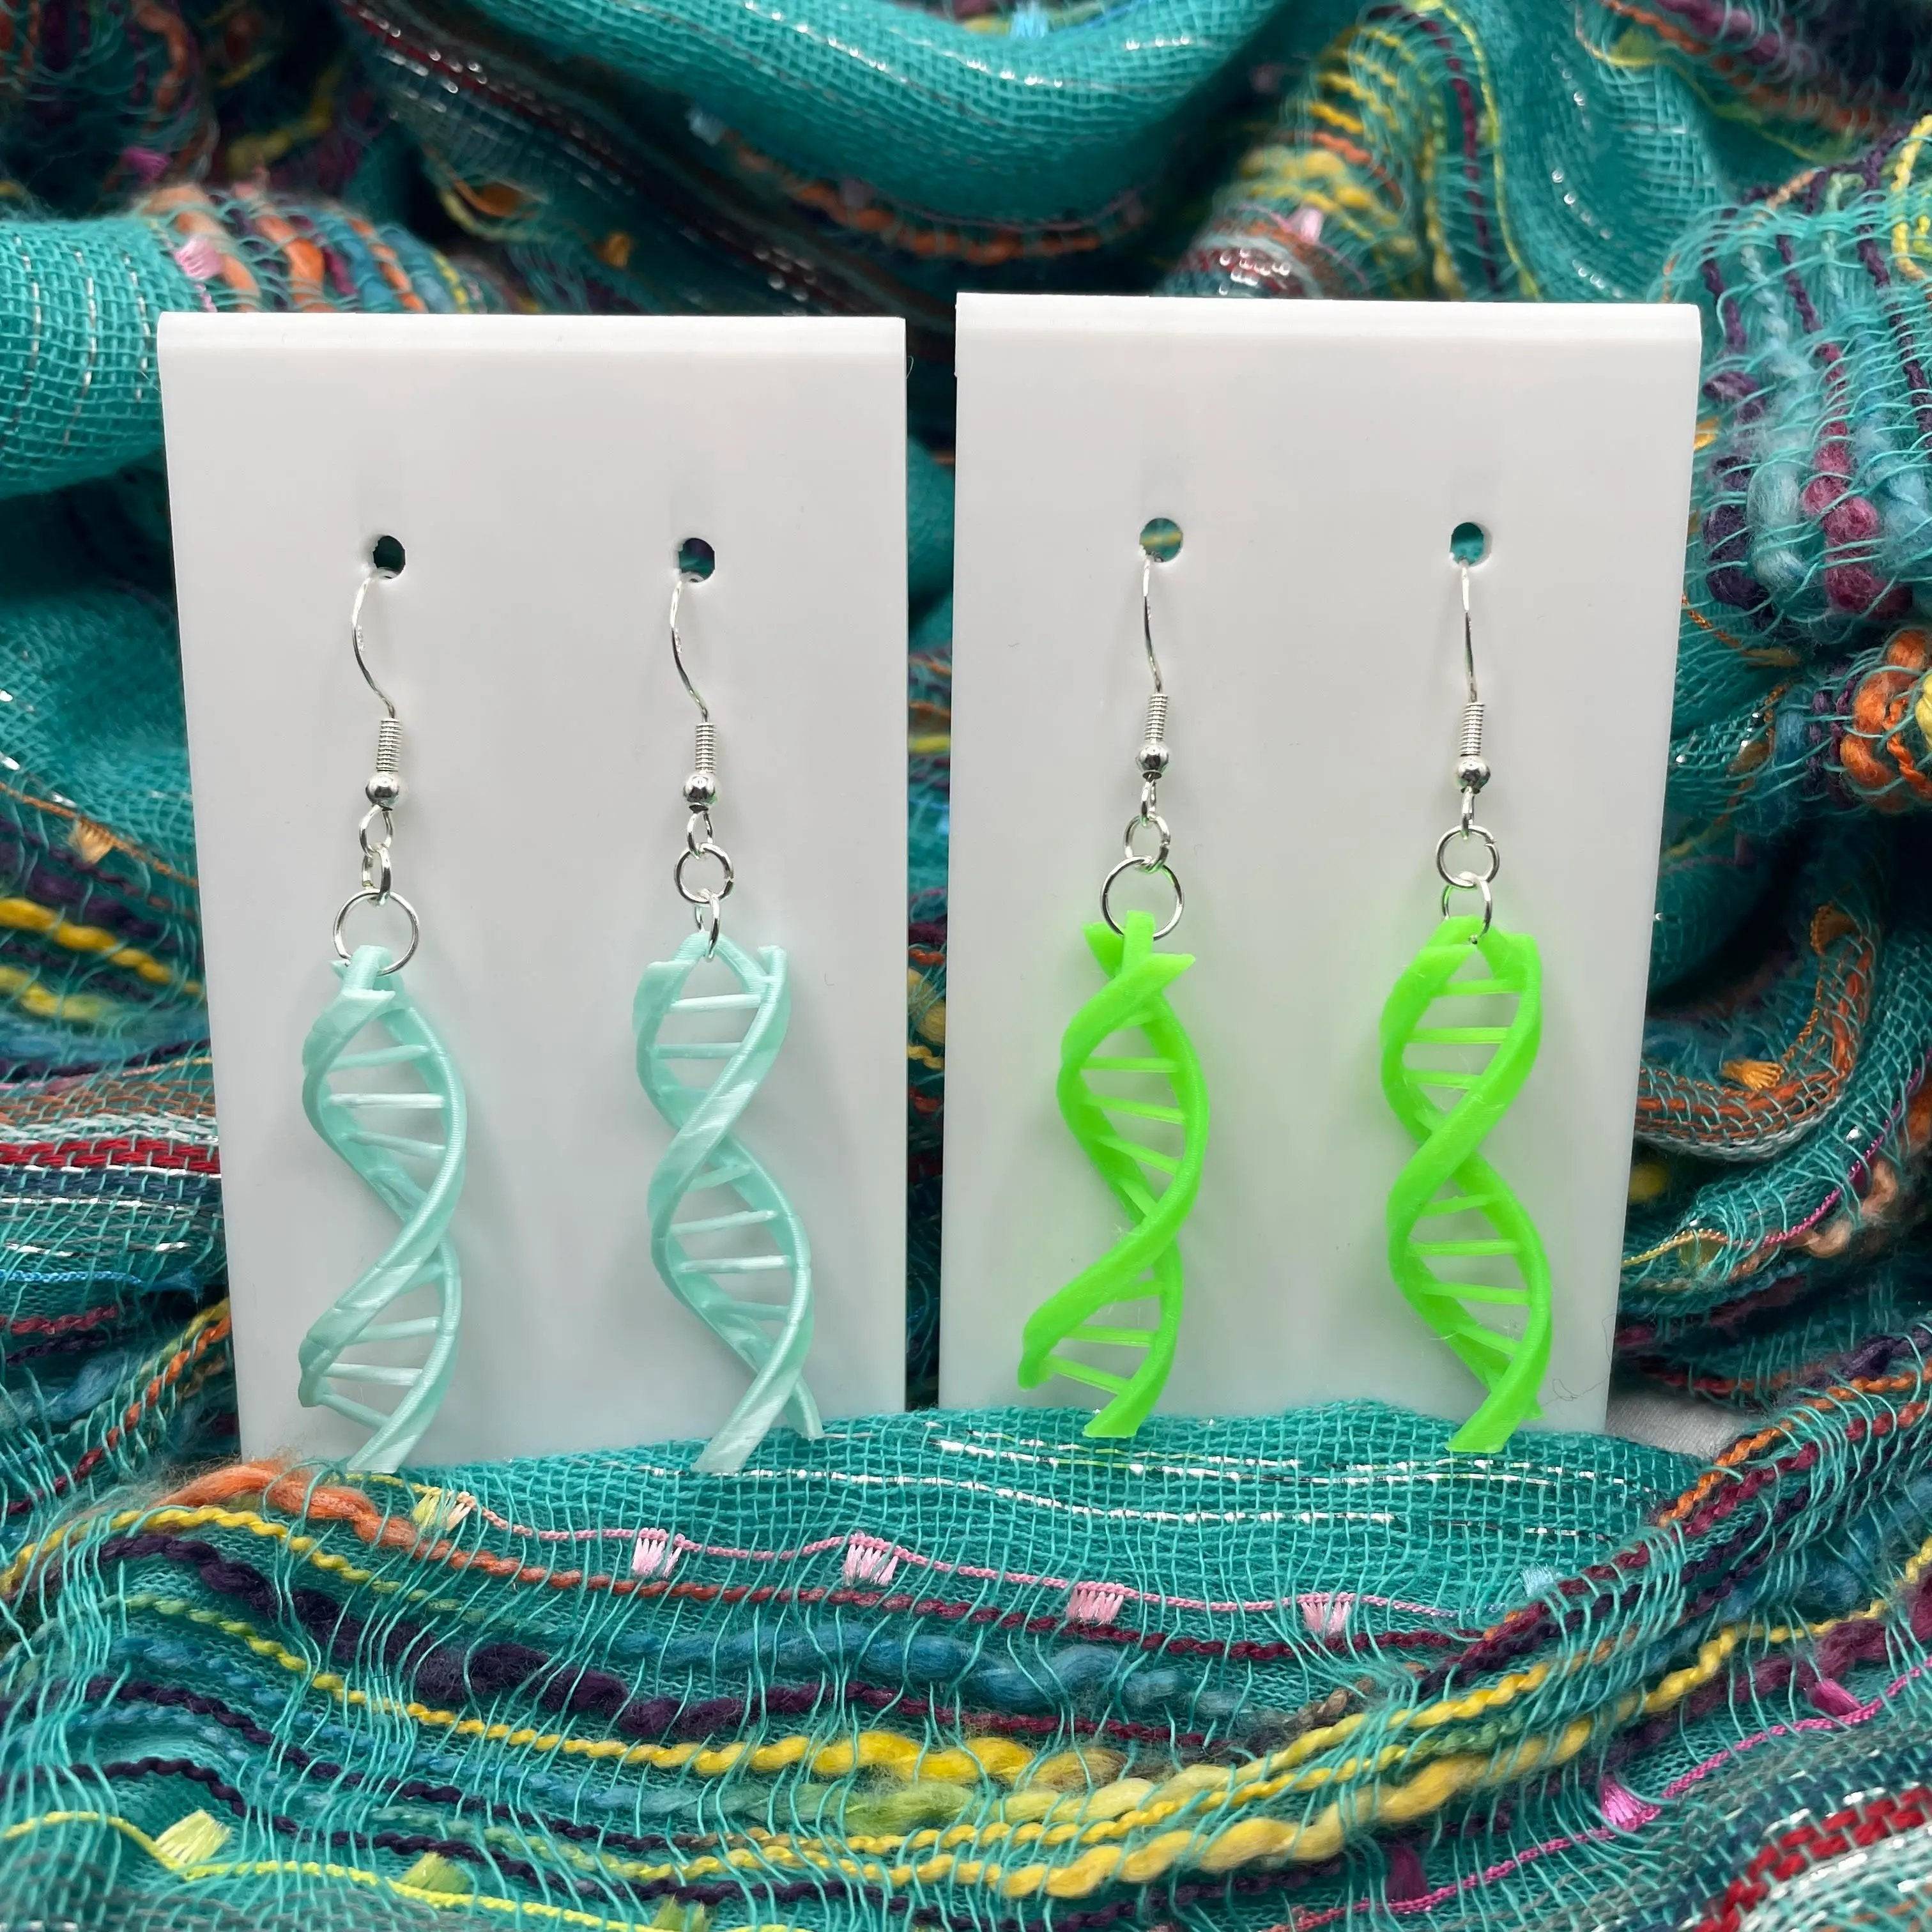 Double Helix DNA Dangle Earrings bring a fun flair to your style.